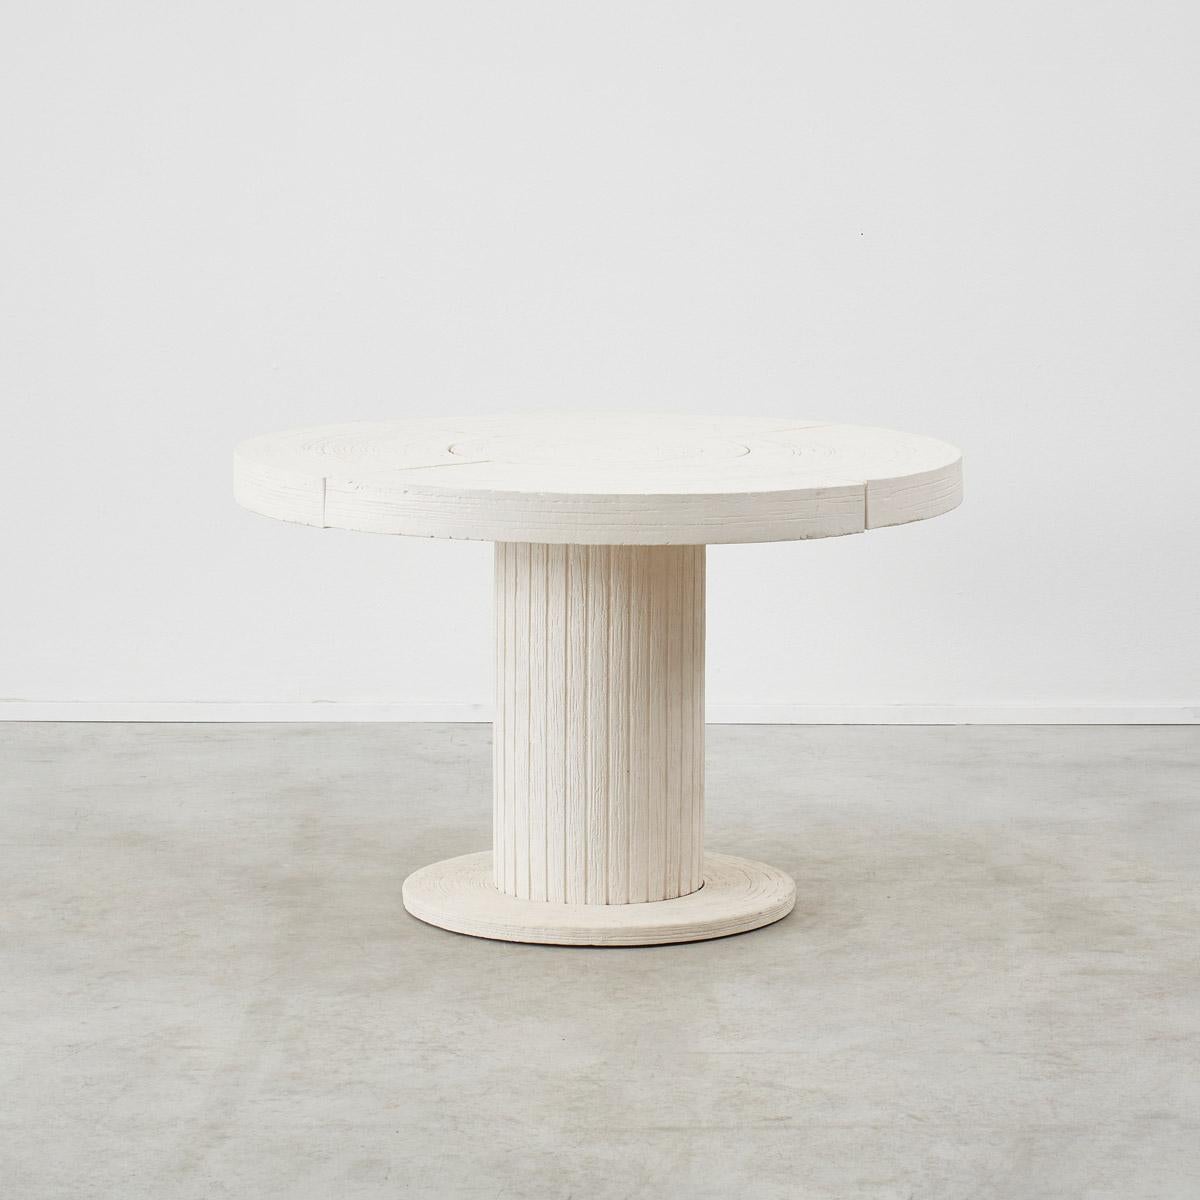 An artistically crafted custom ceramic centre table designed by Irakli Zaria for a West London interior. With a round top raised on a fluted column, on a plinth base, it imparts a classicism to its contemporary design. This distinctive piece carries